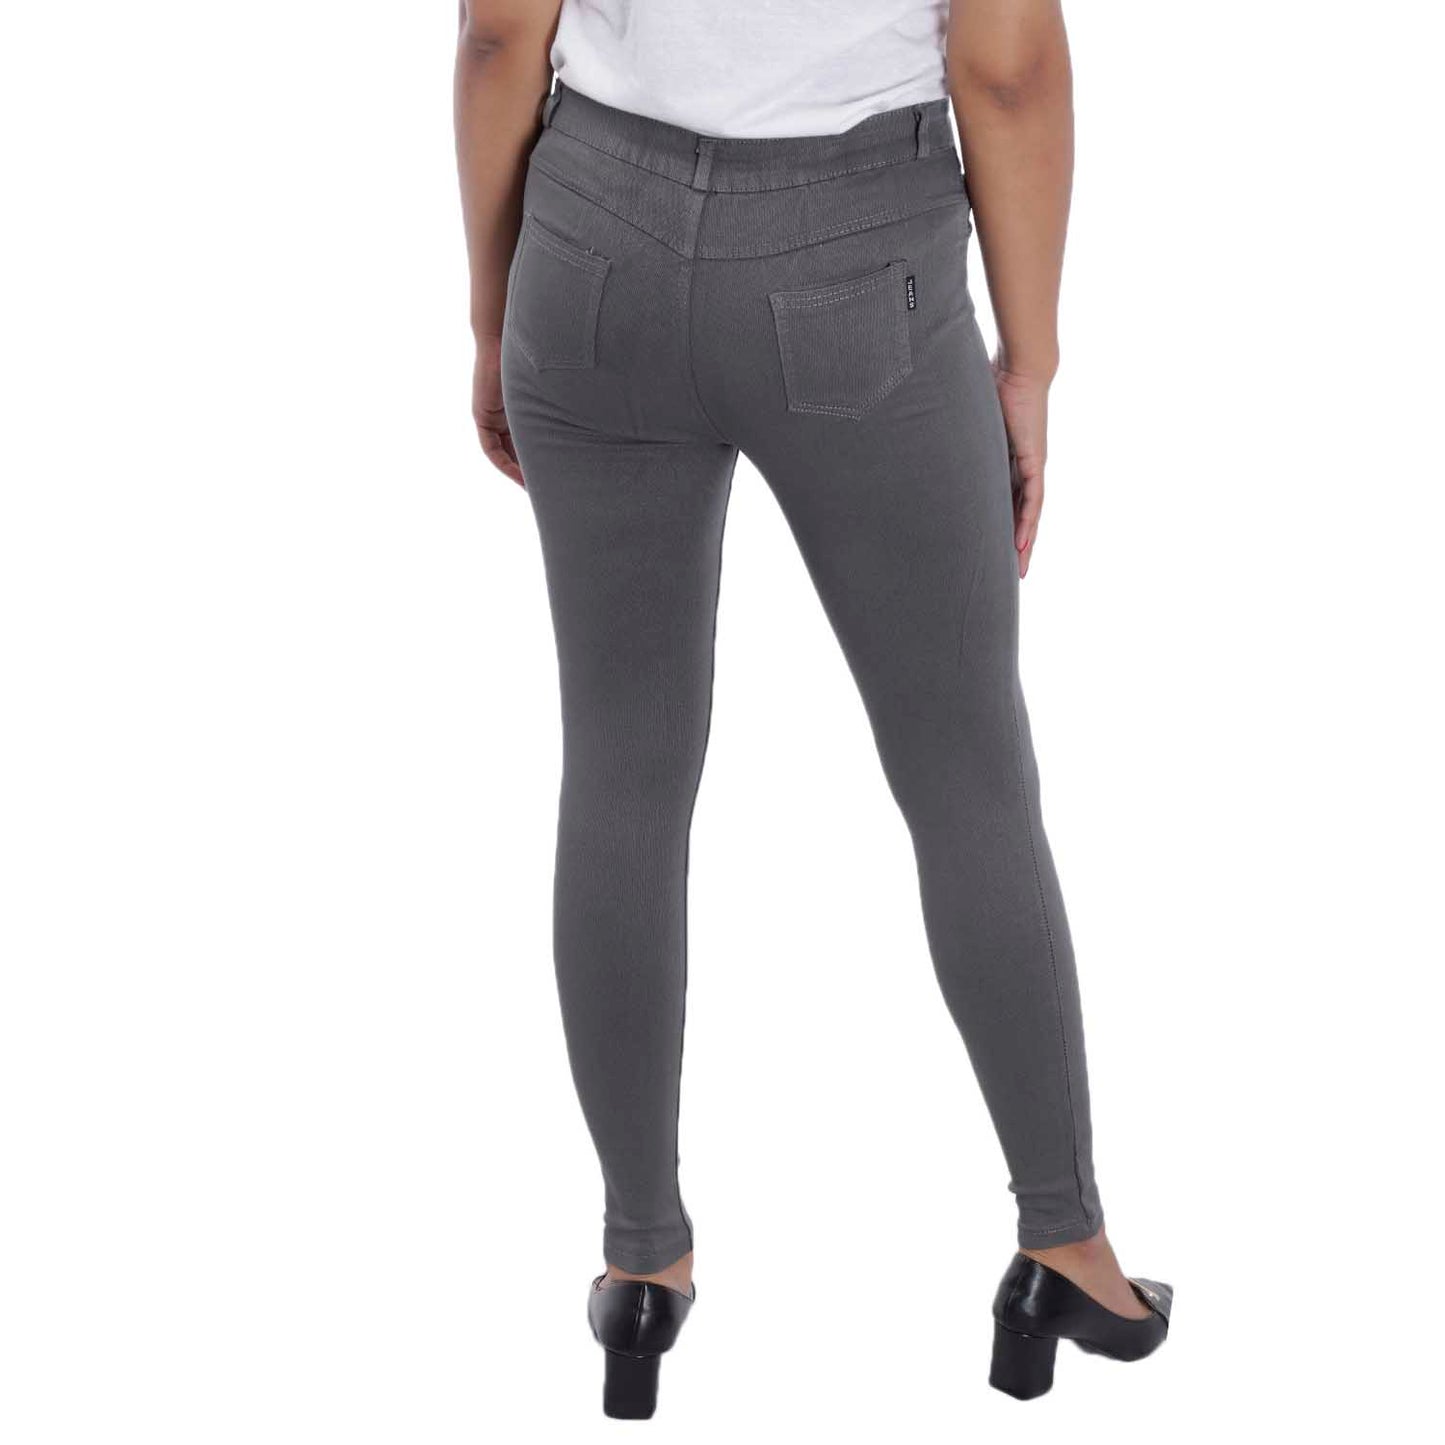 Grey High Rise Skinny Stretchable Jeans